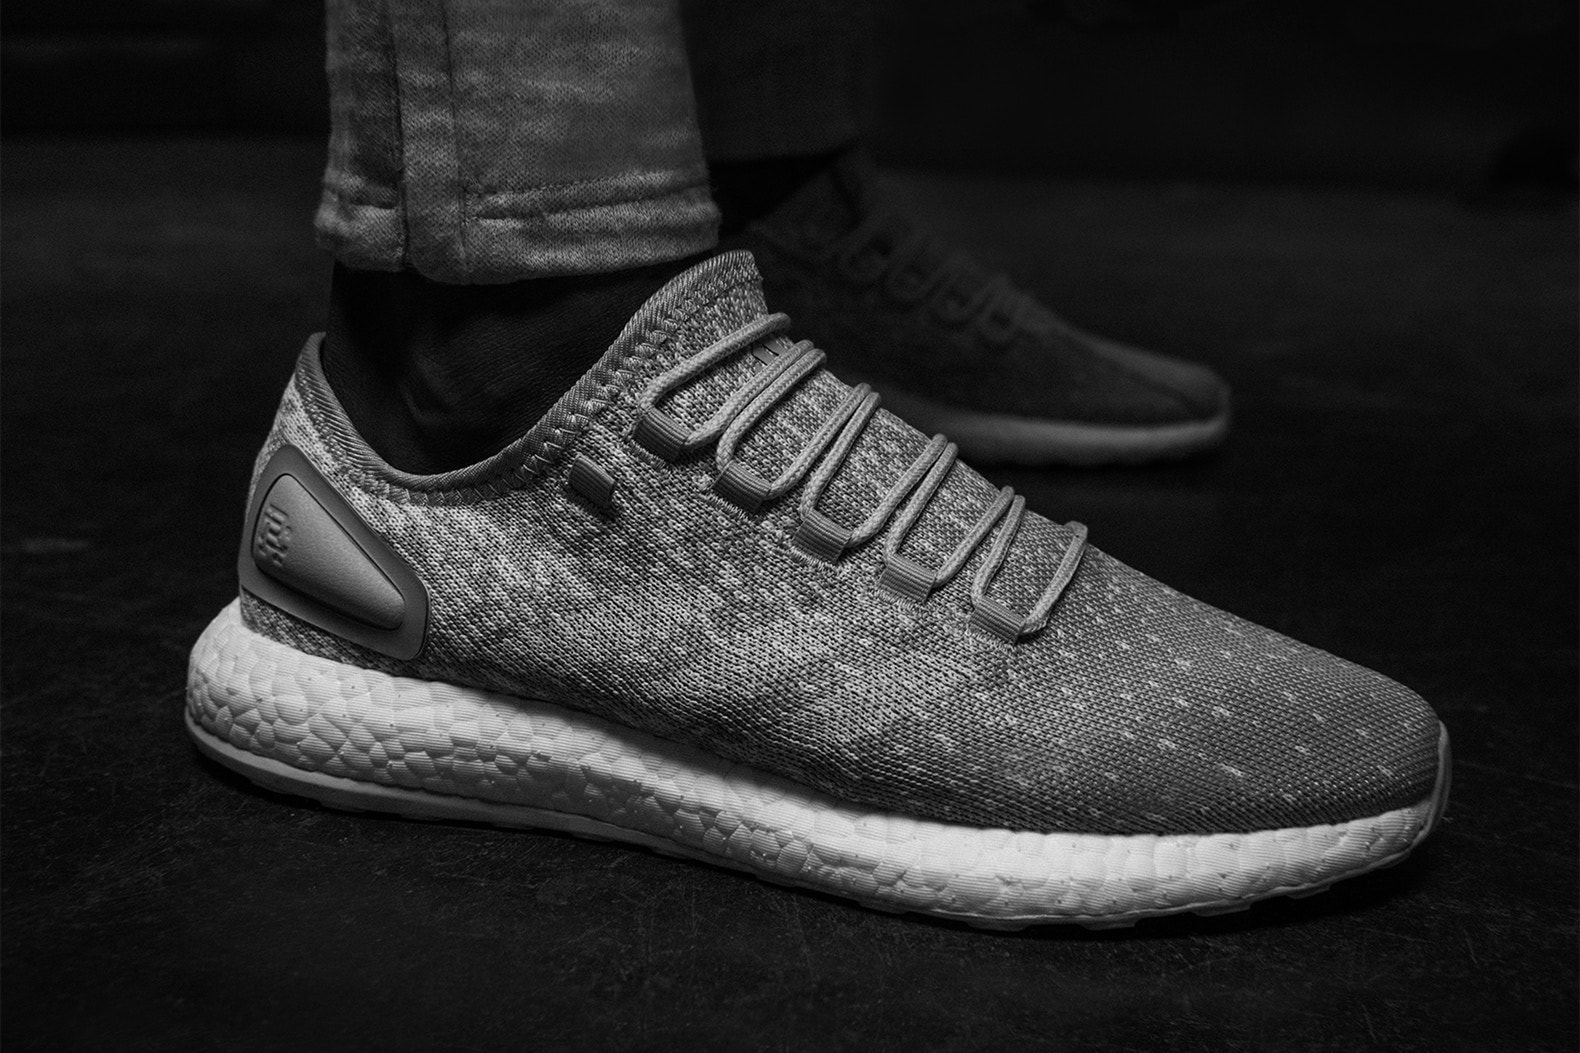 adidas Reigning Champ 2017 Fall/Winter Collaboration